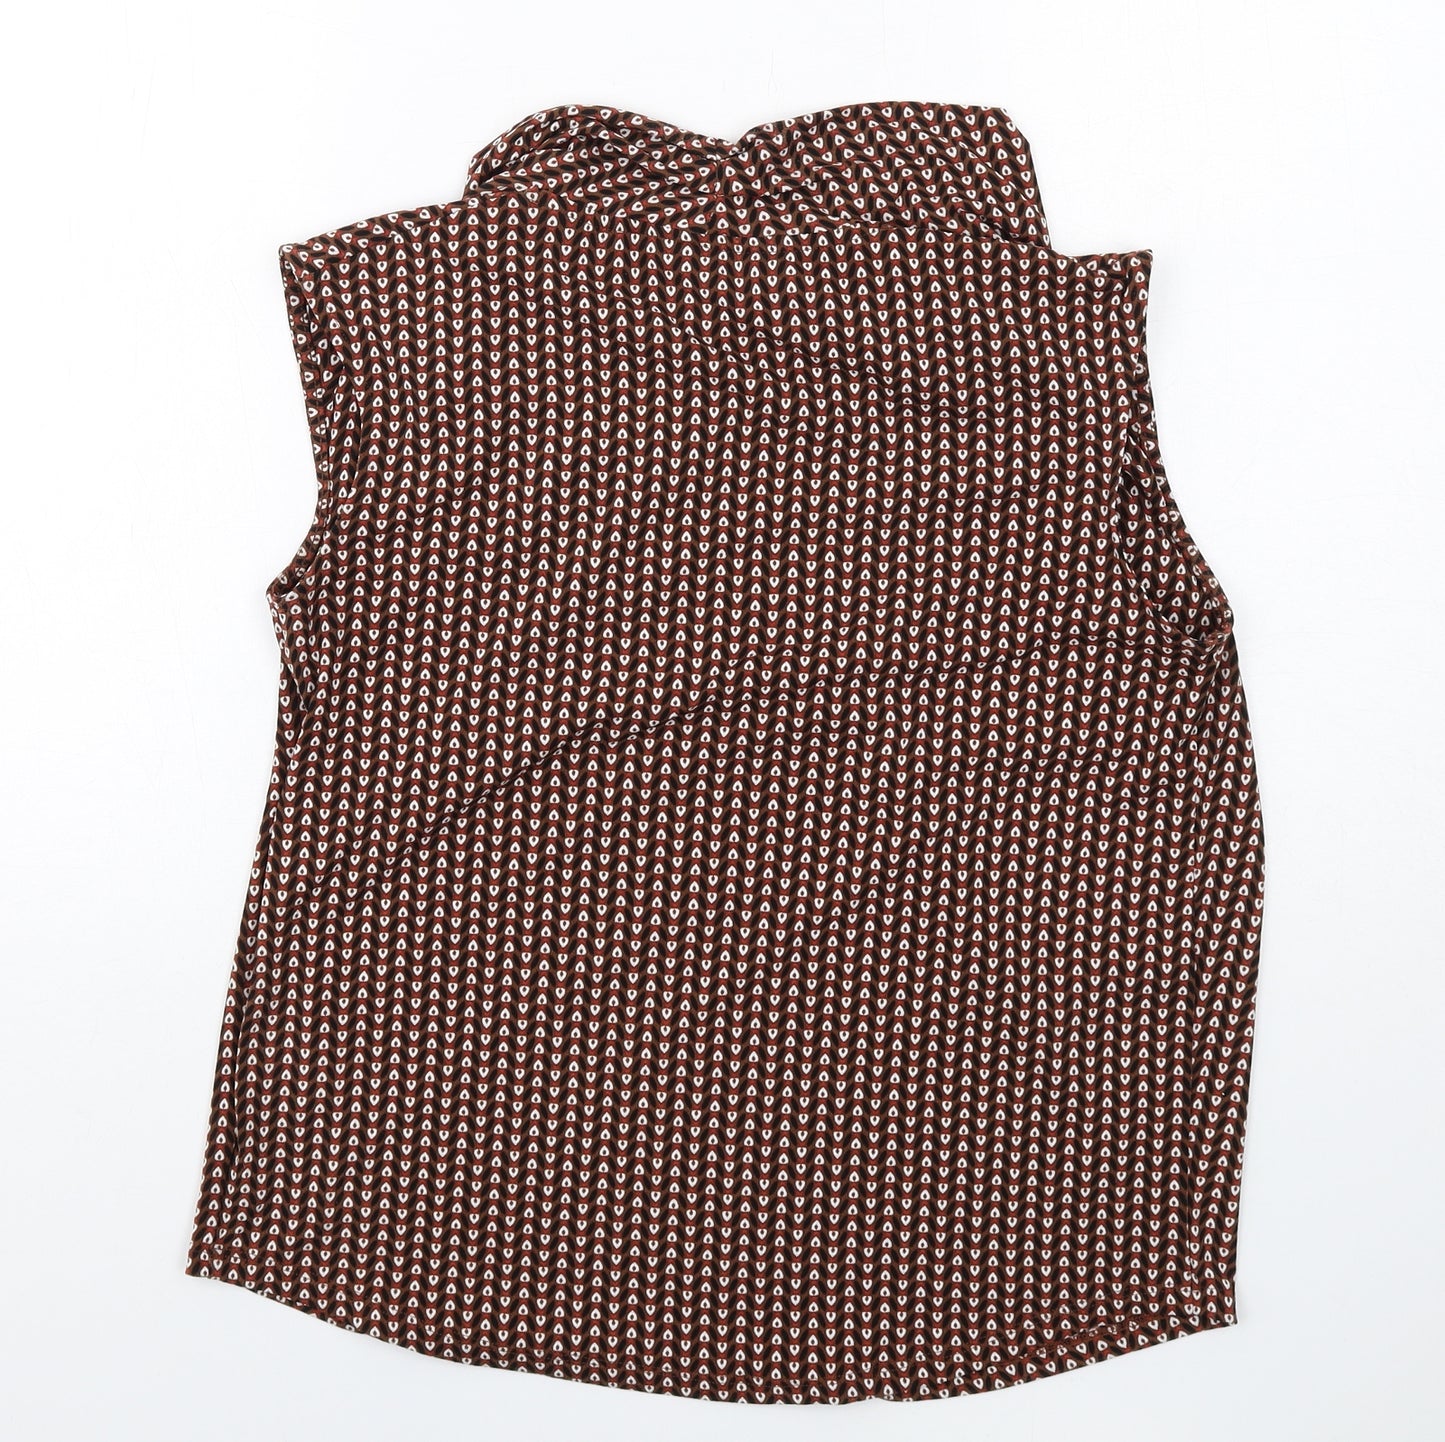 NEXT Womens Brown Geometric Polyester Basic Tank Size 12 Collared